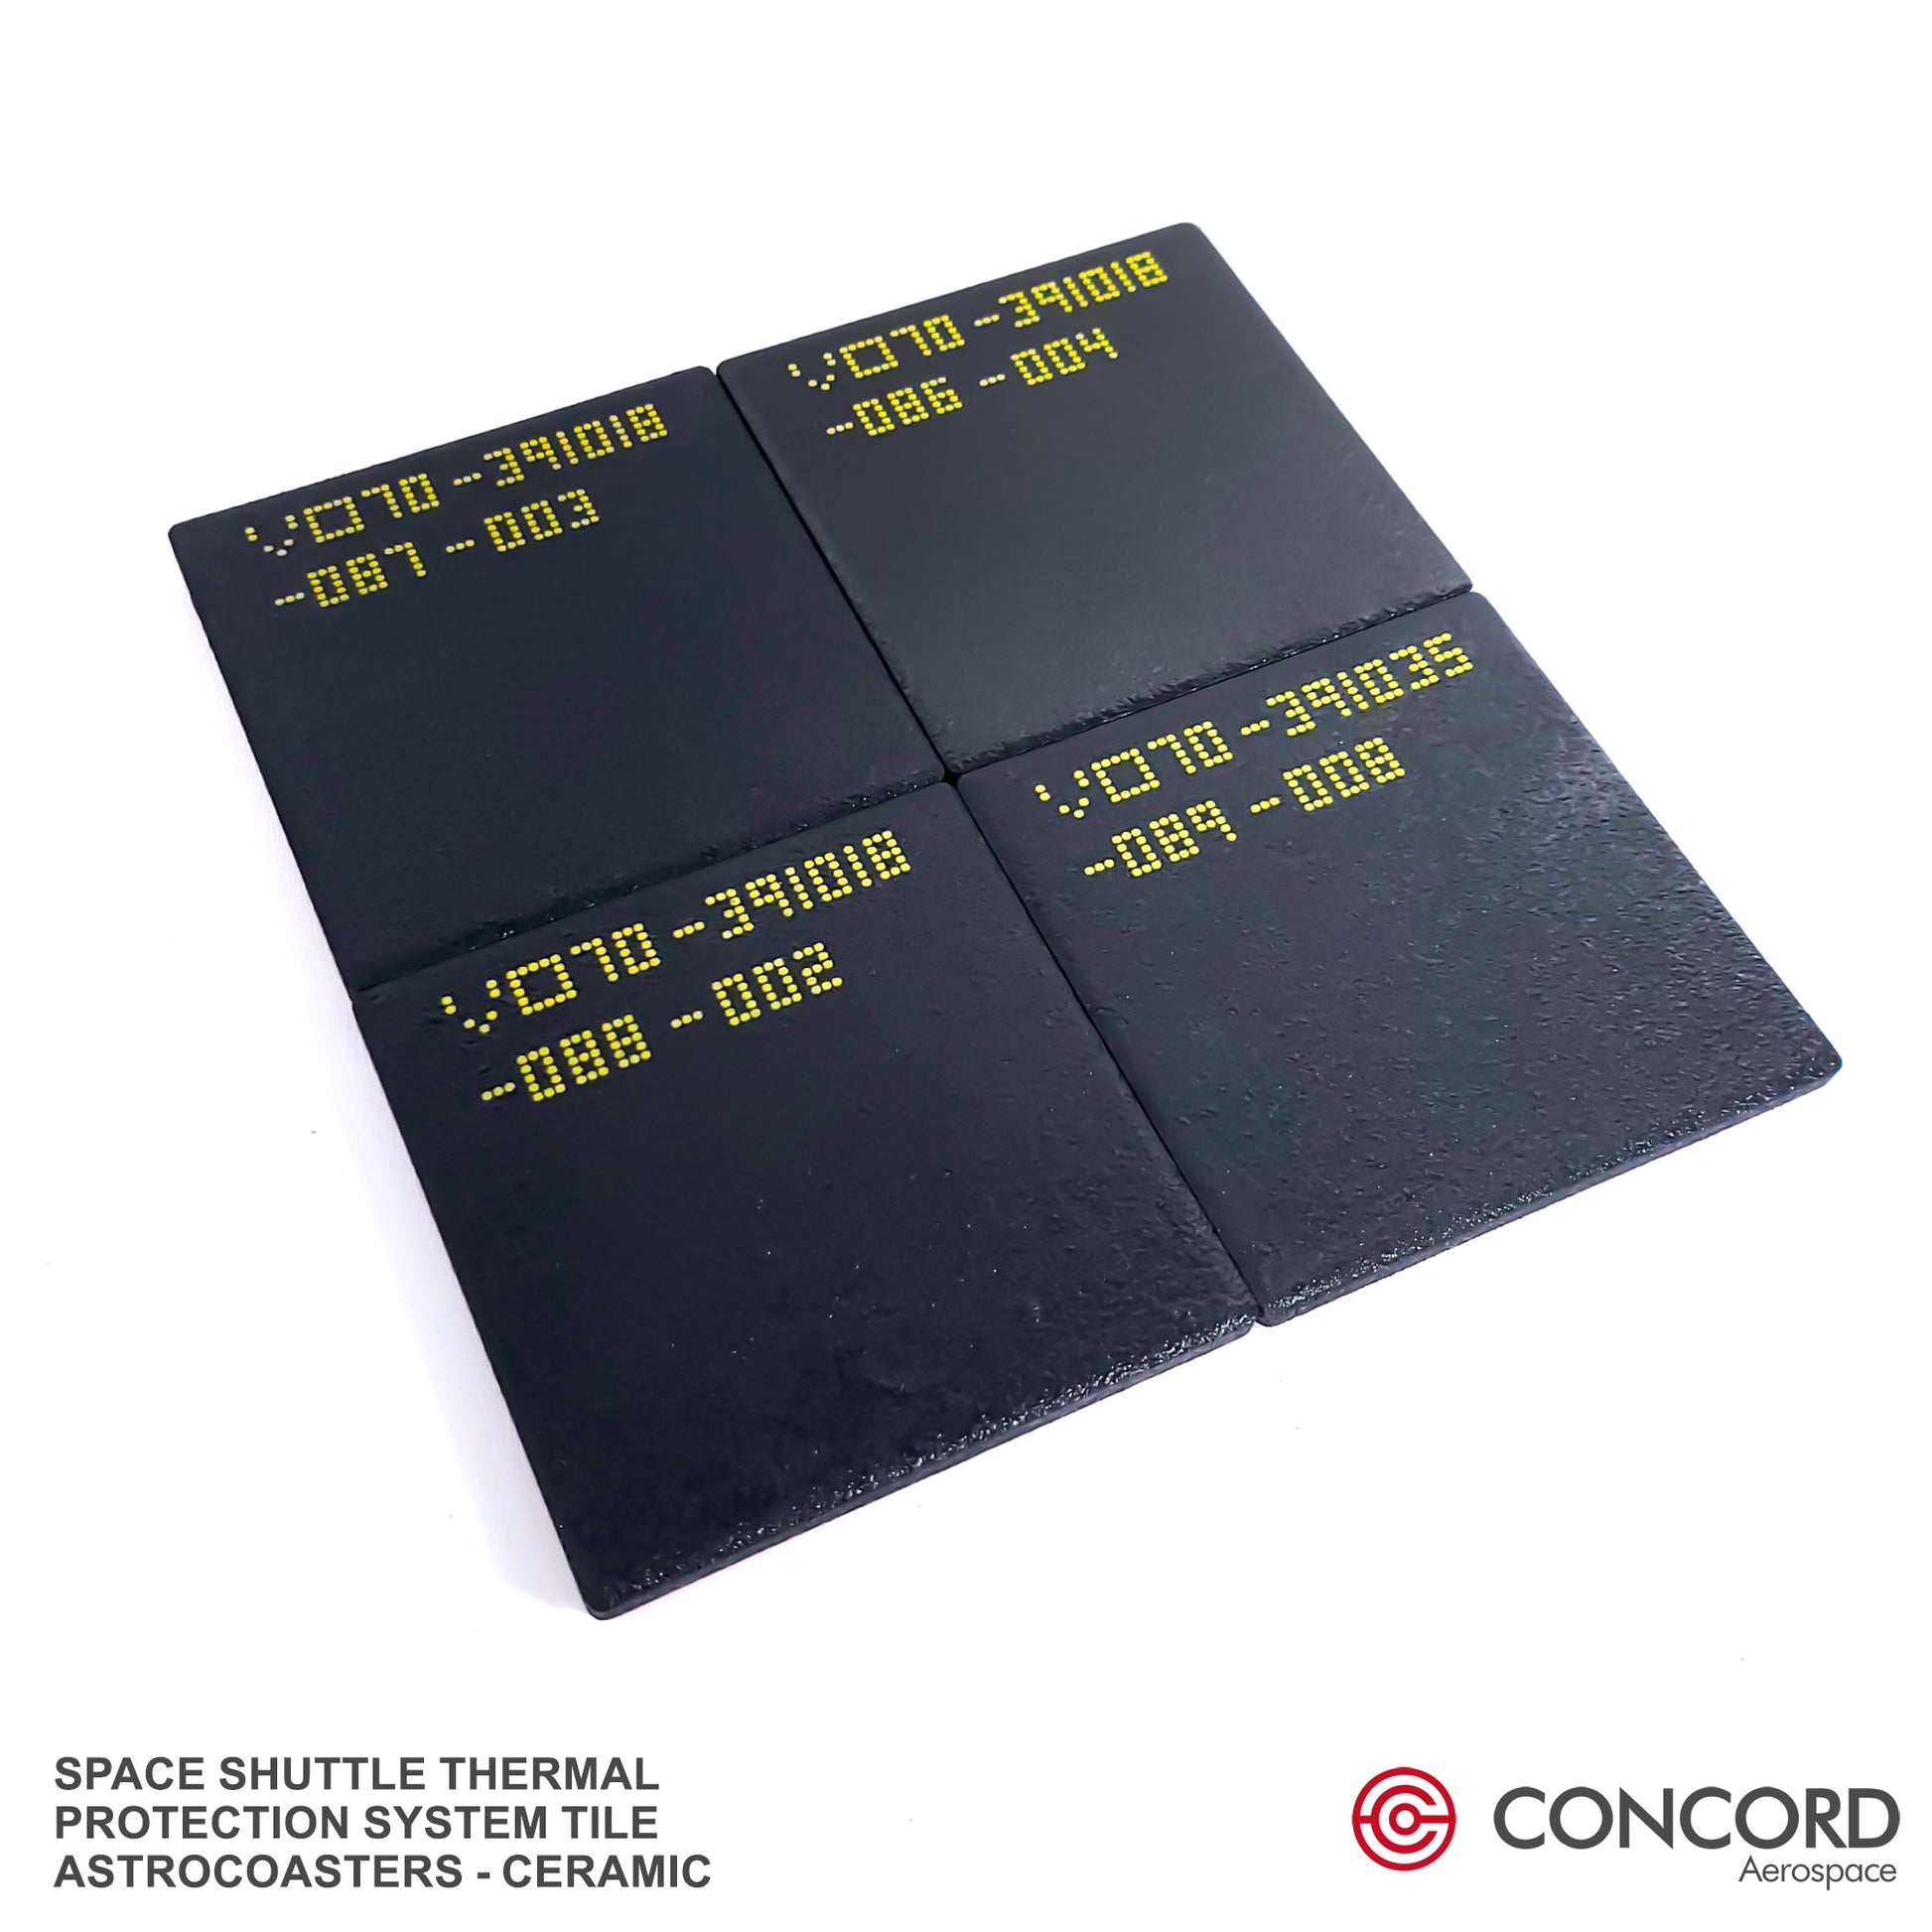 SPACE SHUTTLE THERMAL PROTECTION SYSTEM TILE ASTROCOASTER - Concord Aerospace